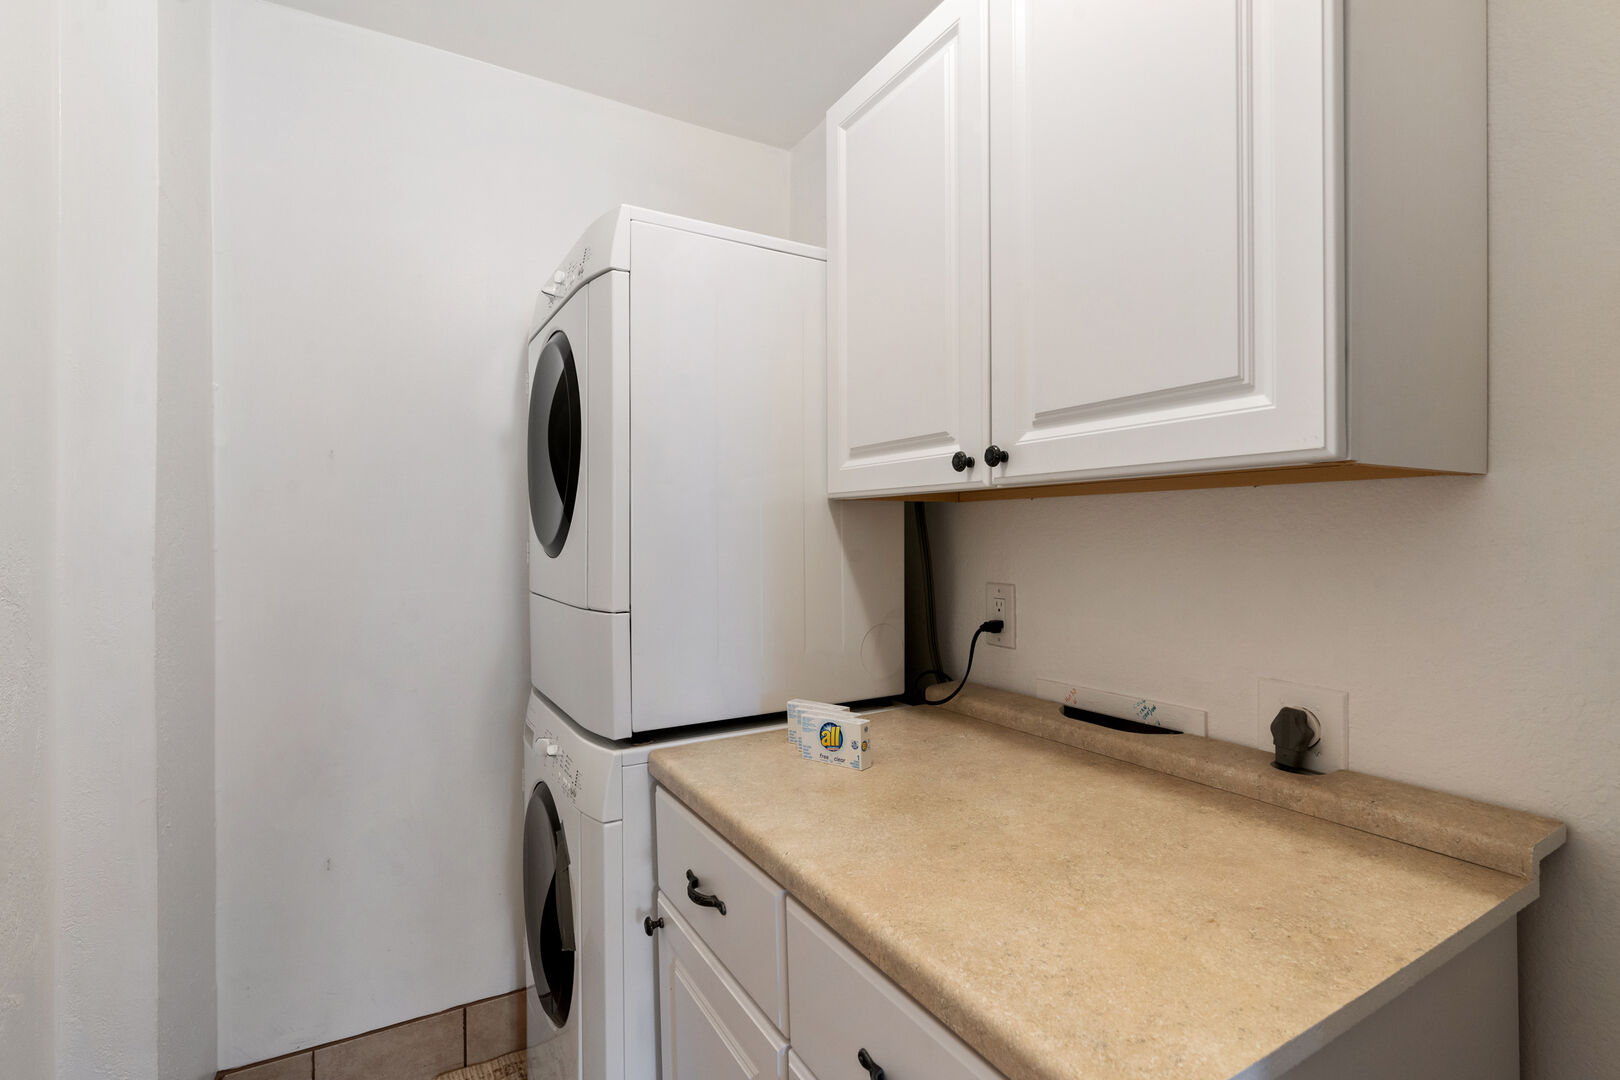 in- unit laundry room has a stacked washer and dryer.